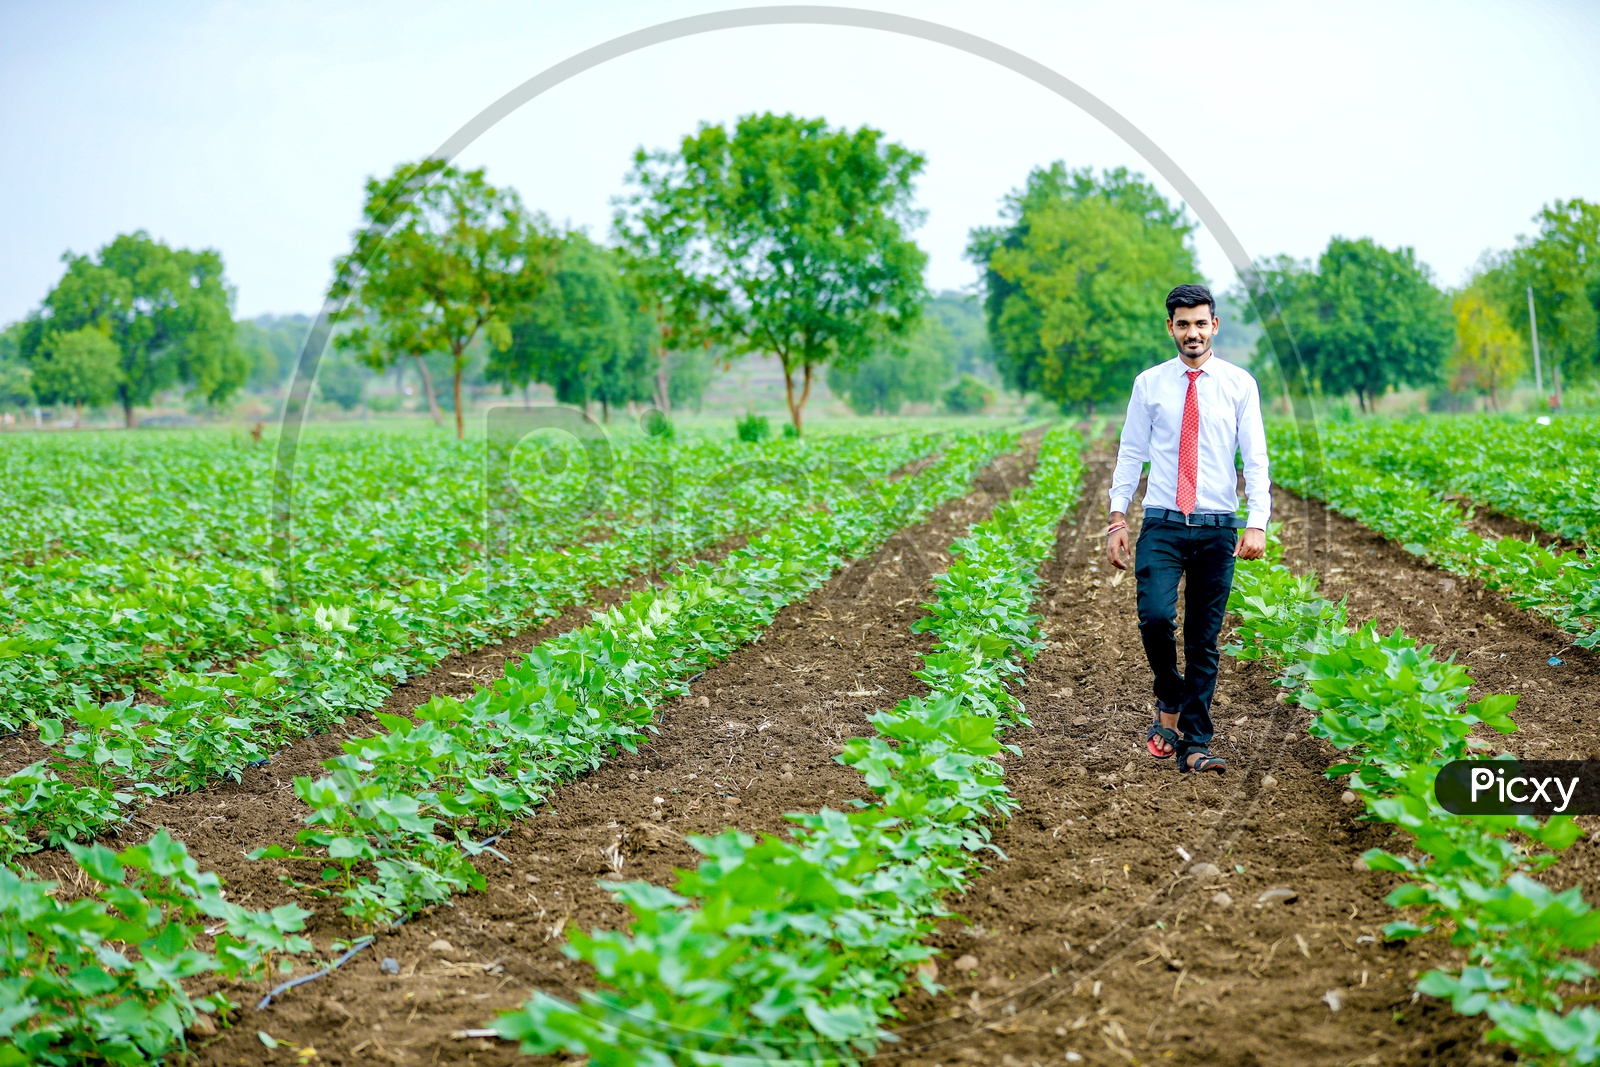 A Young Professional In Agricultural Field With an Expression